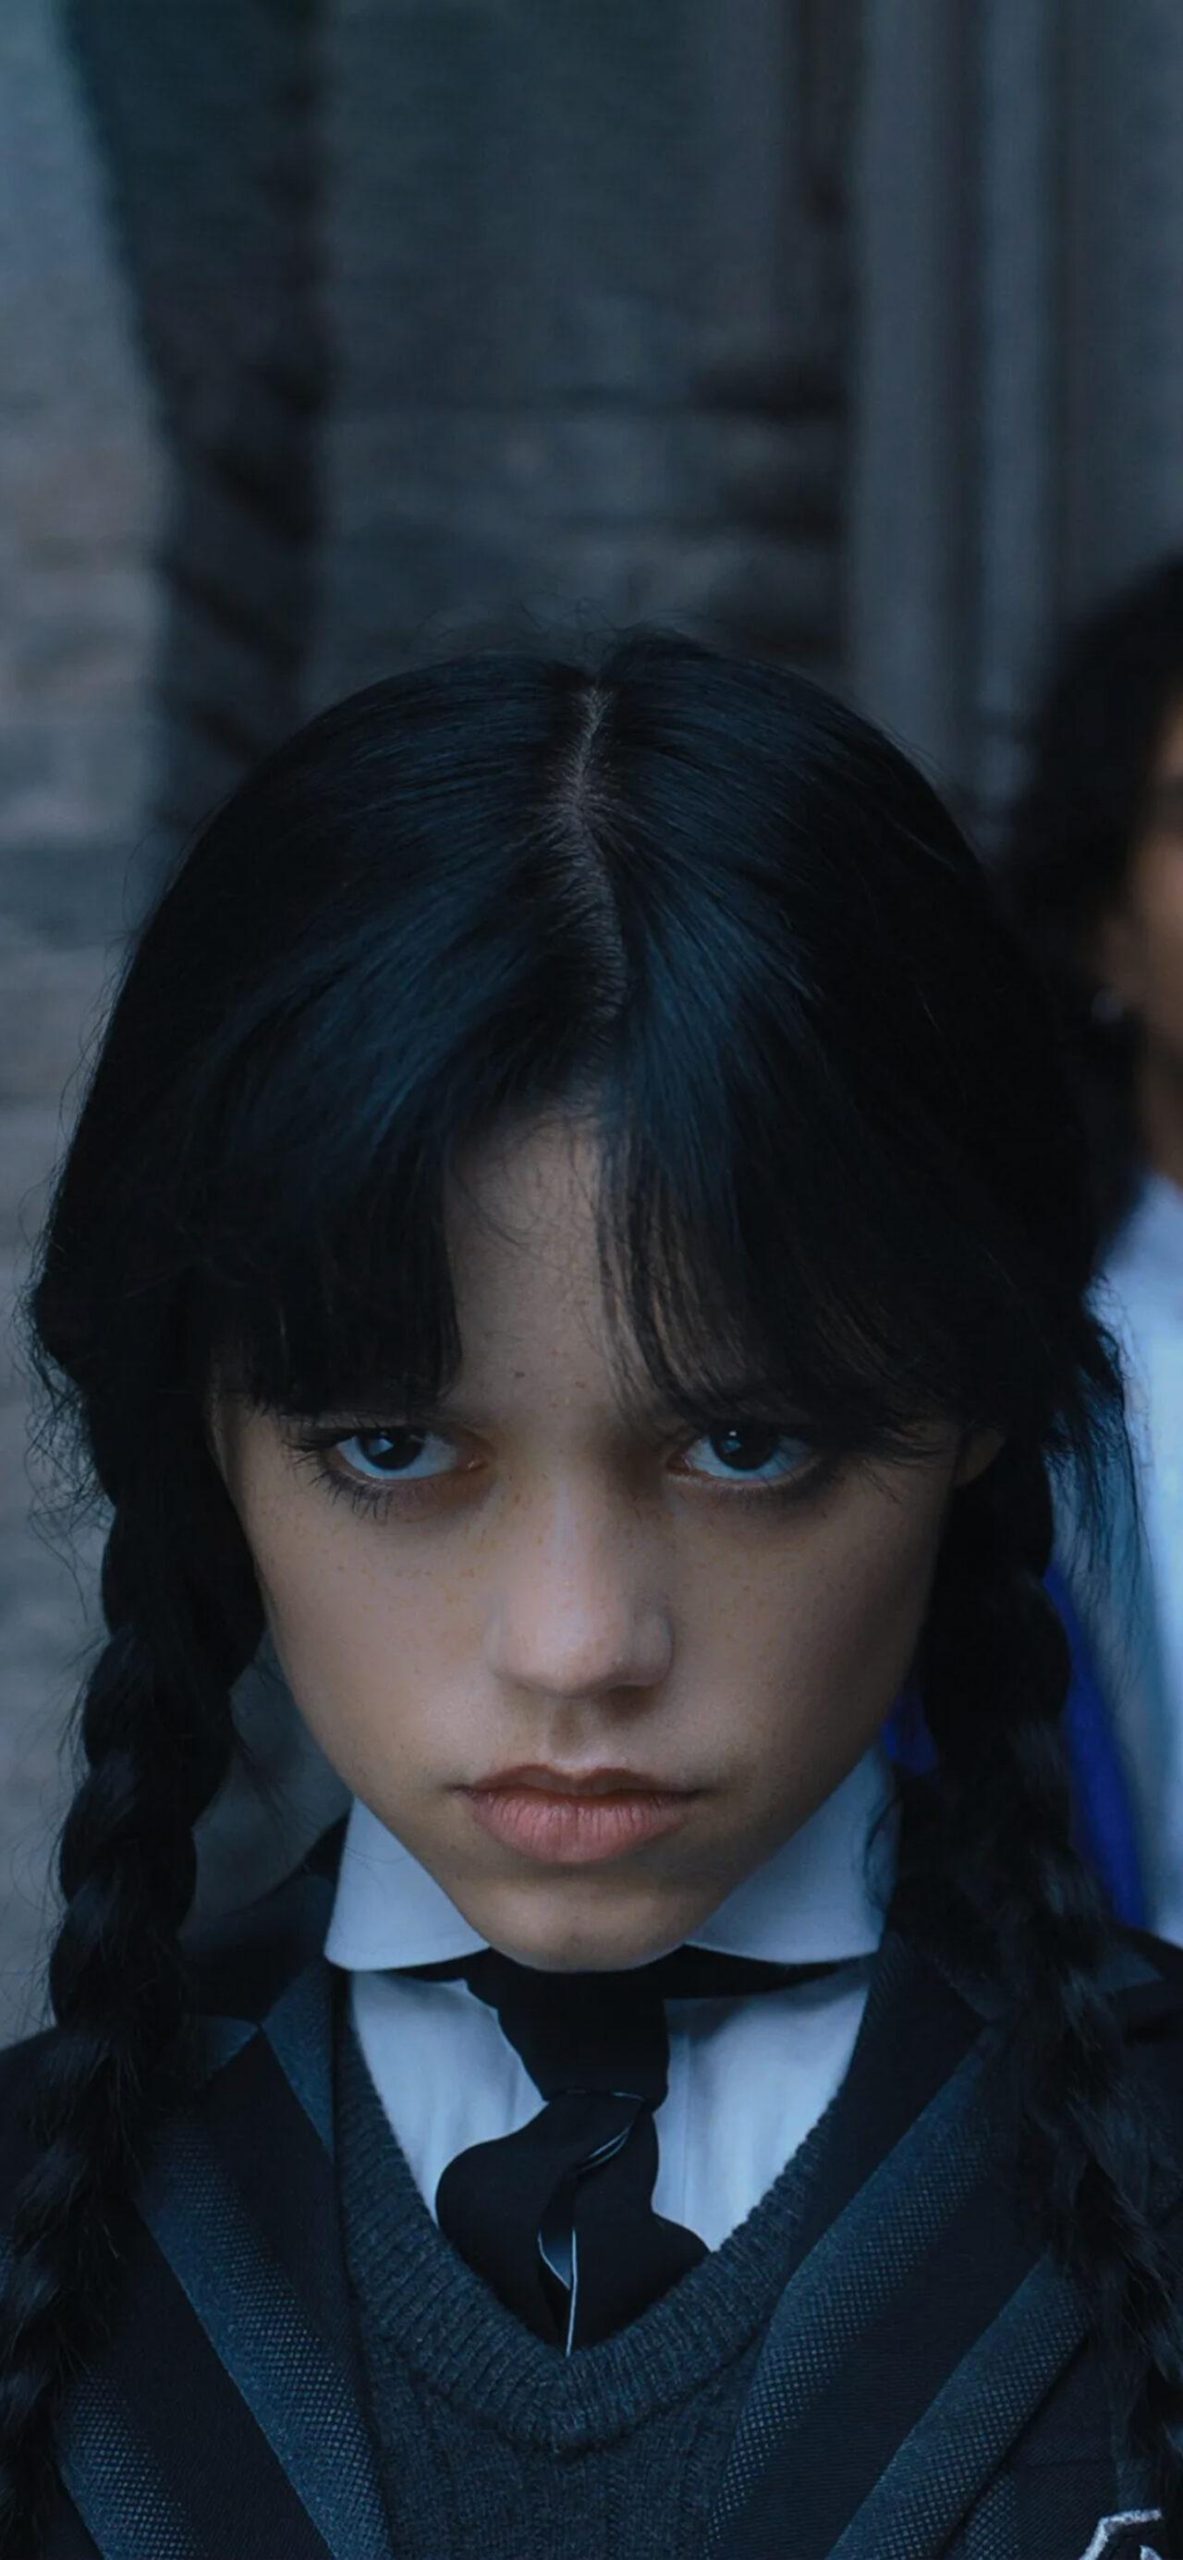 Wednesday Addams Phone Wallpaper For Pc, Wednesday And Enid, Movies